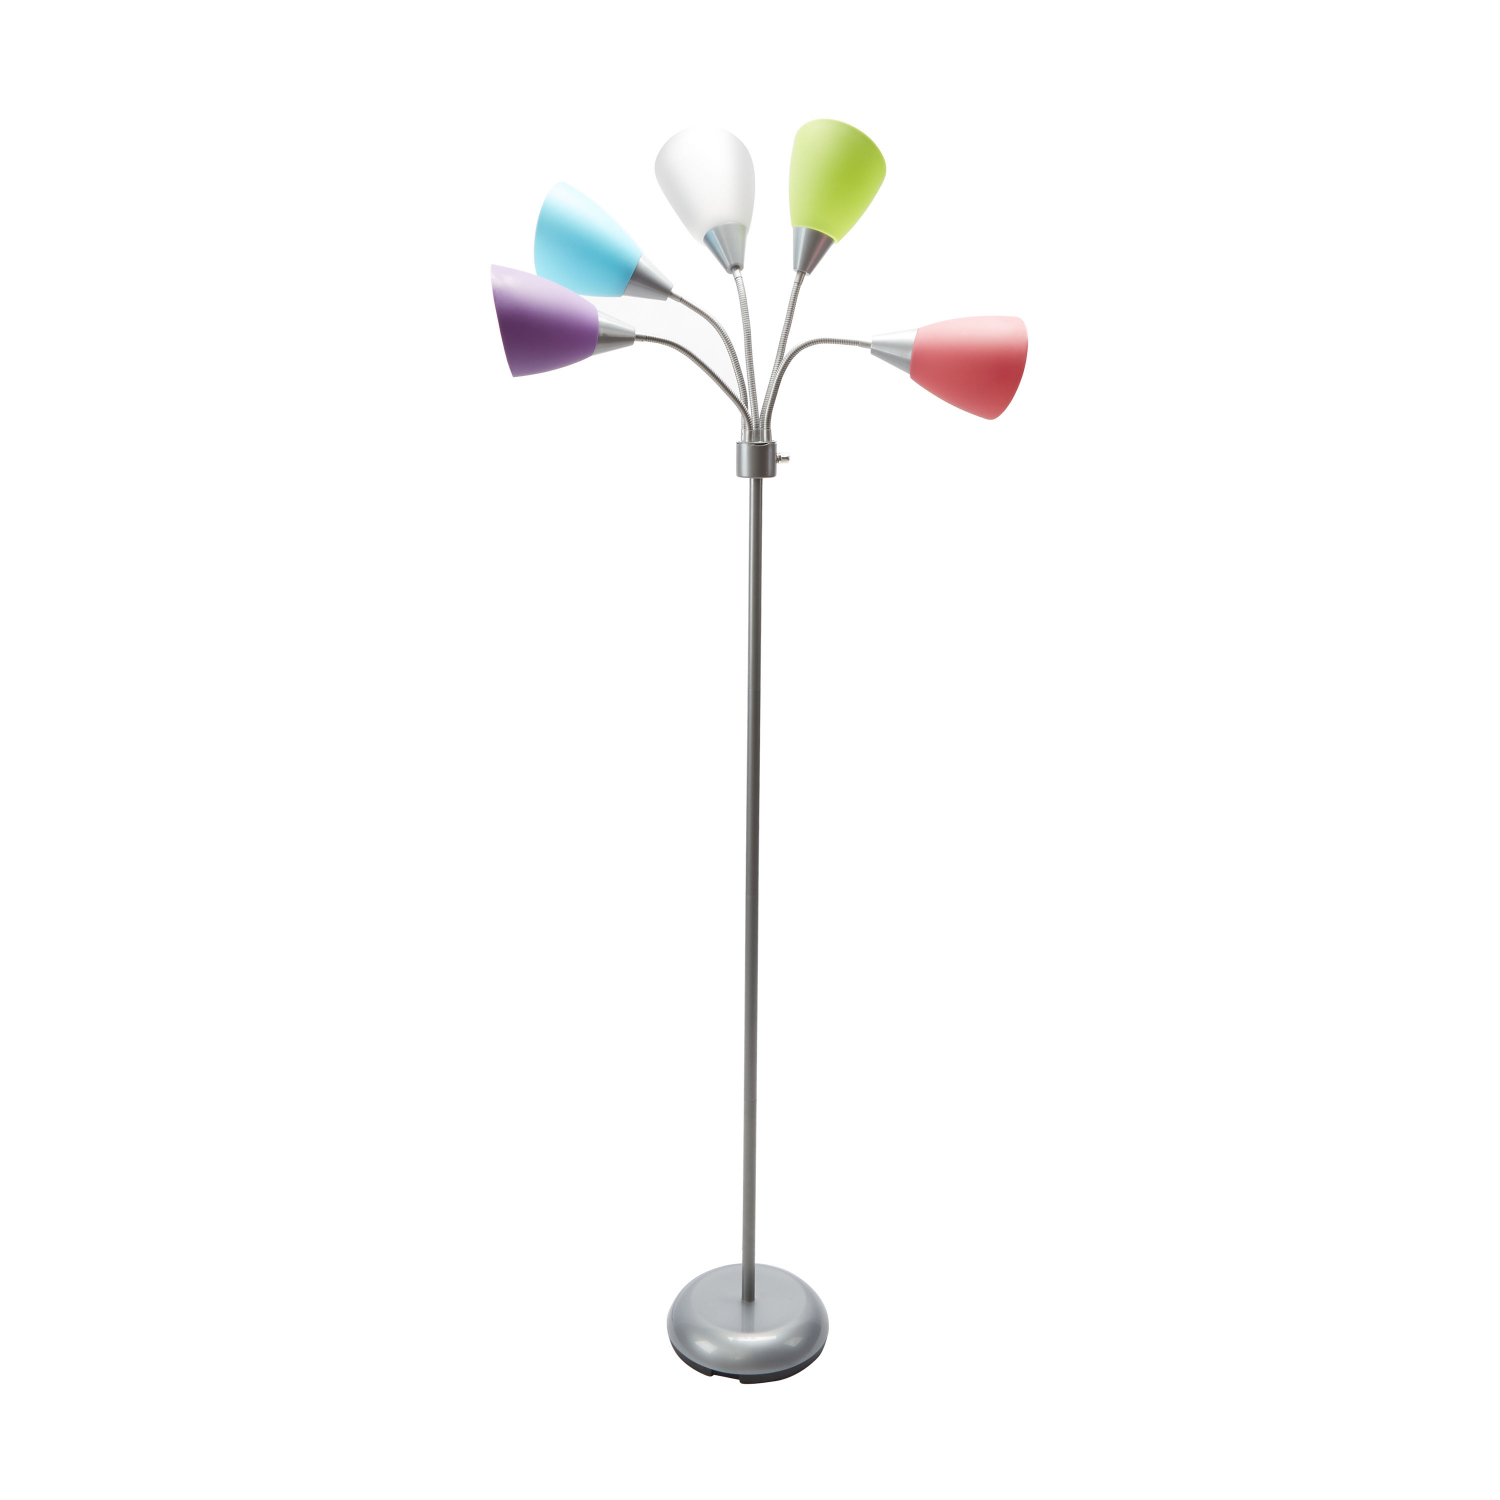 Details About Floor Lamp Stand W 5 Multi Color Light Shade Adjustable Arm Room Lighting Dorm with size 1500 X 1500